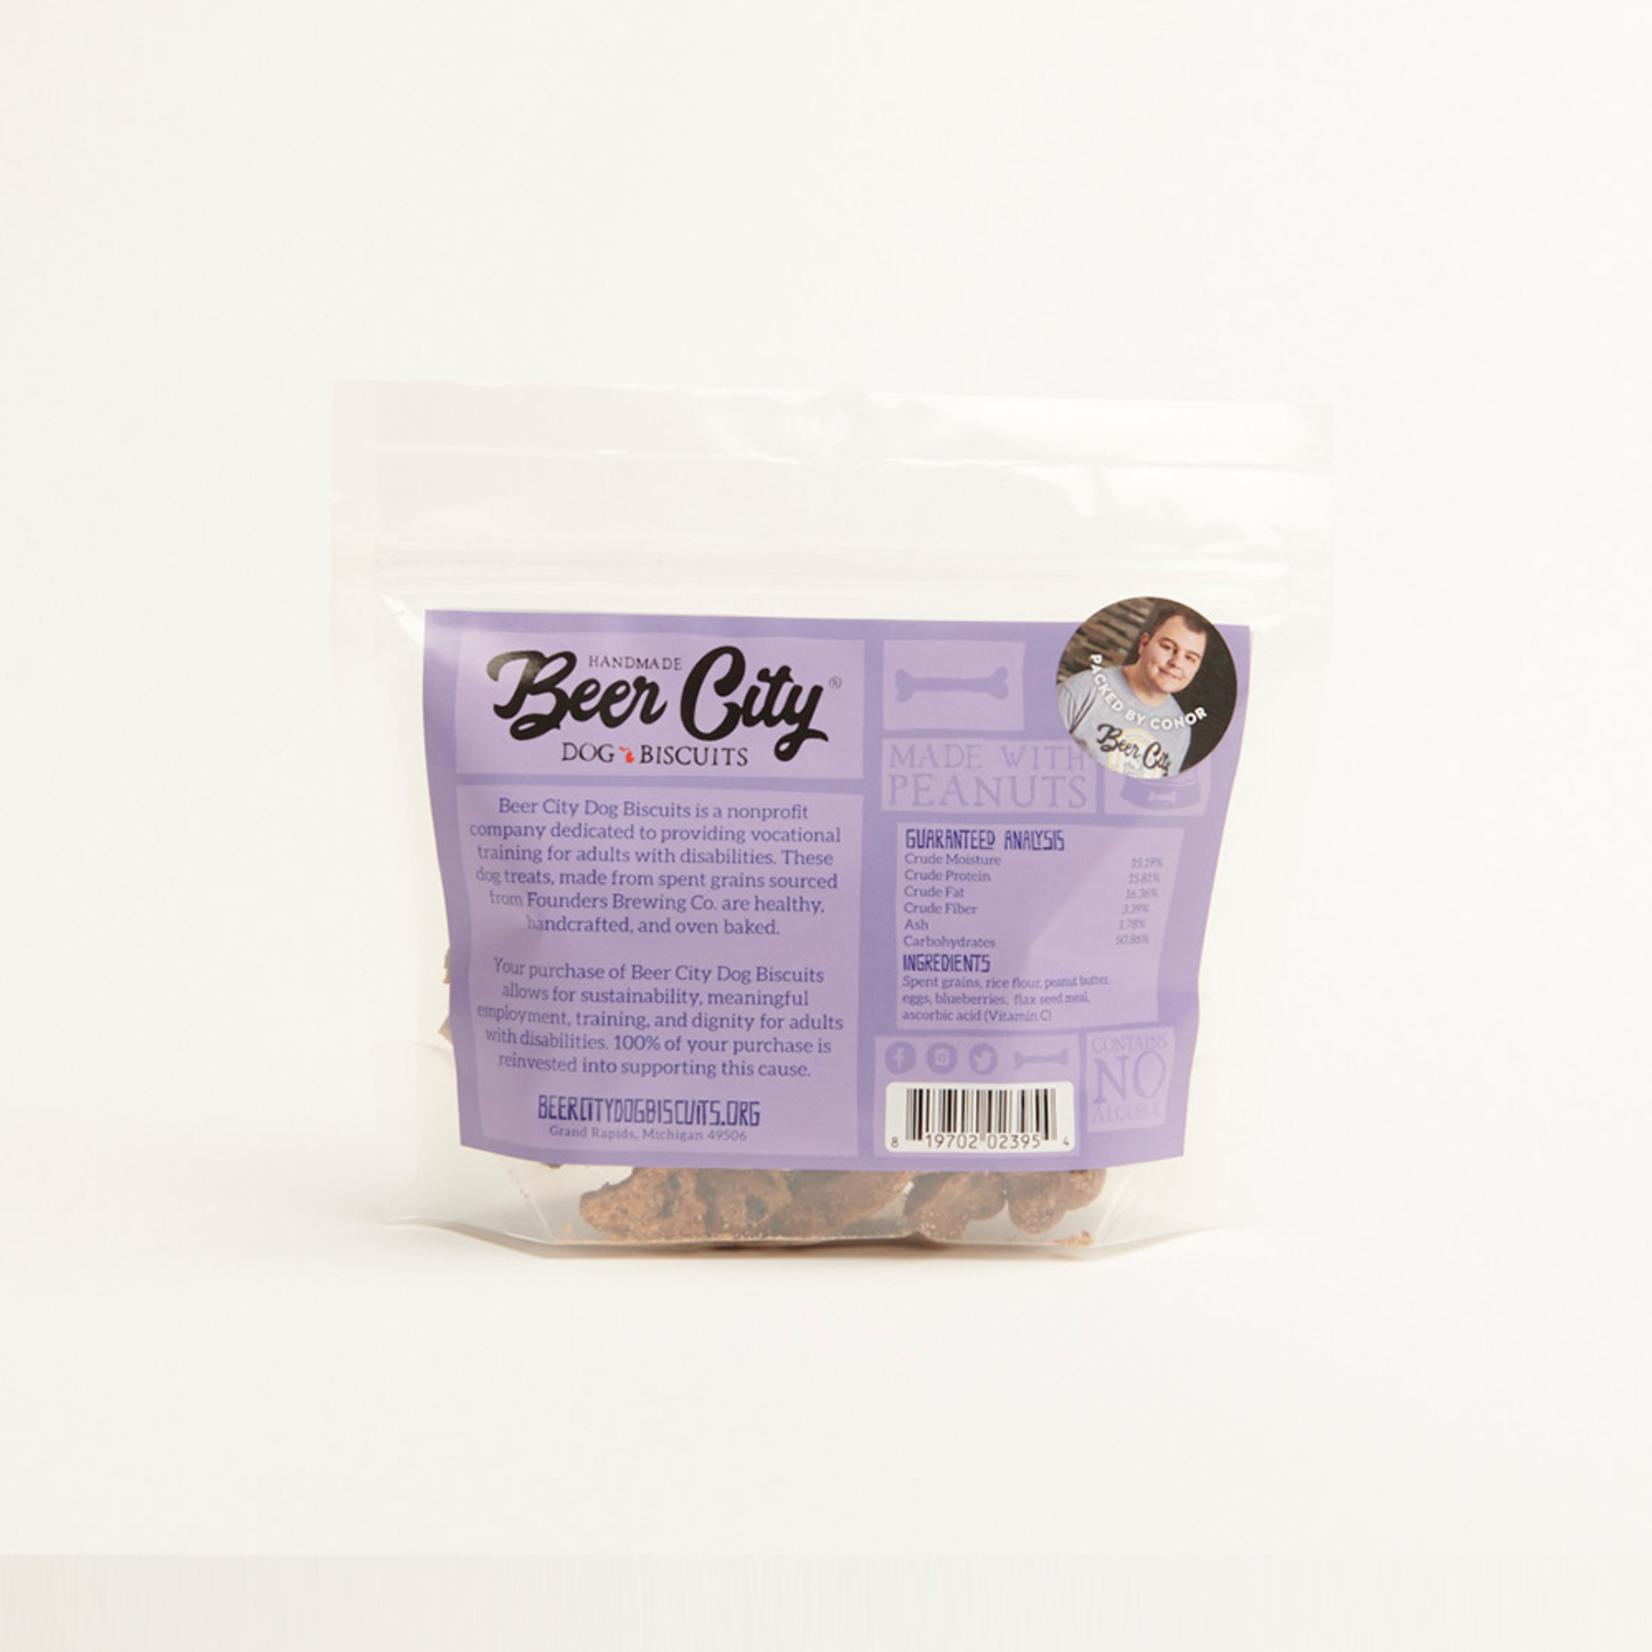 Beer City Beer City Dog Biscuits - Blueberry & Flax